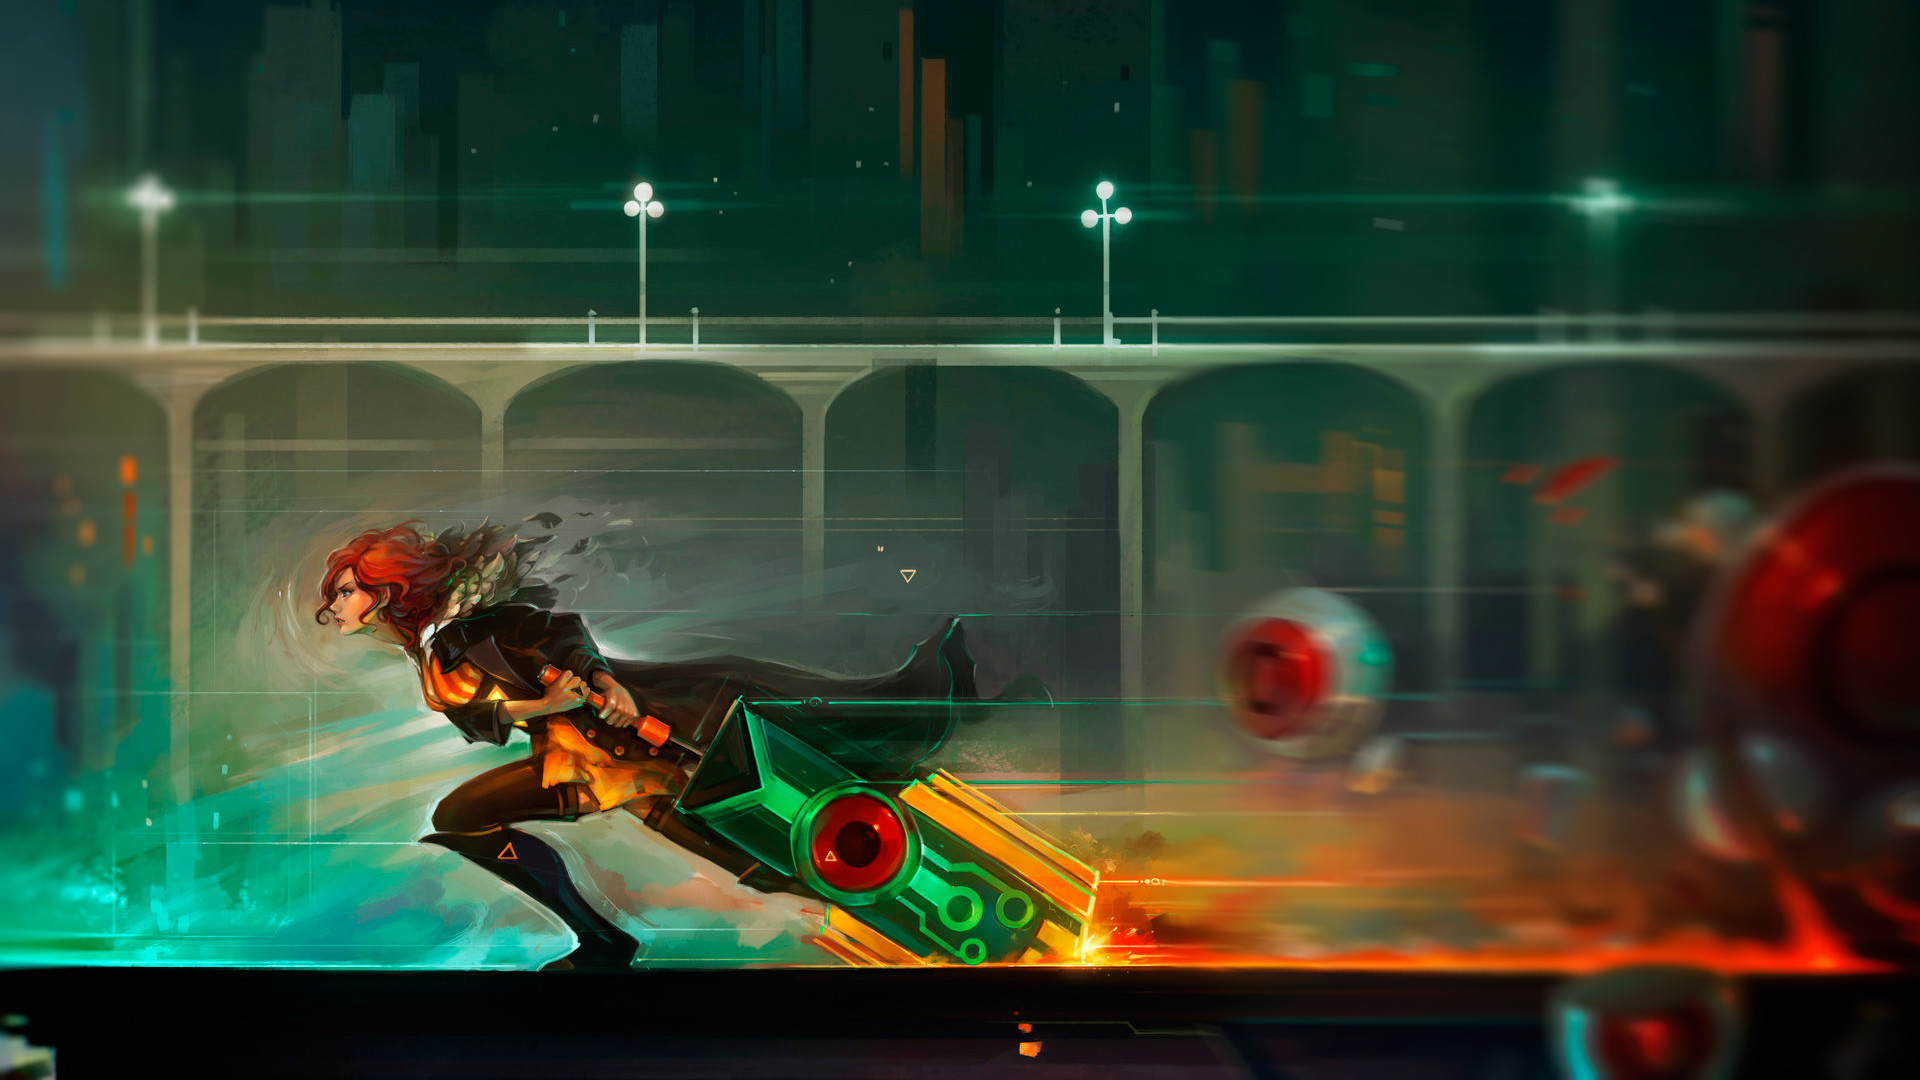 1920x1080 Transistor Game wallpapers (79 Wallpapers)